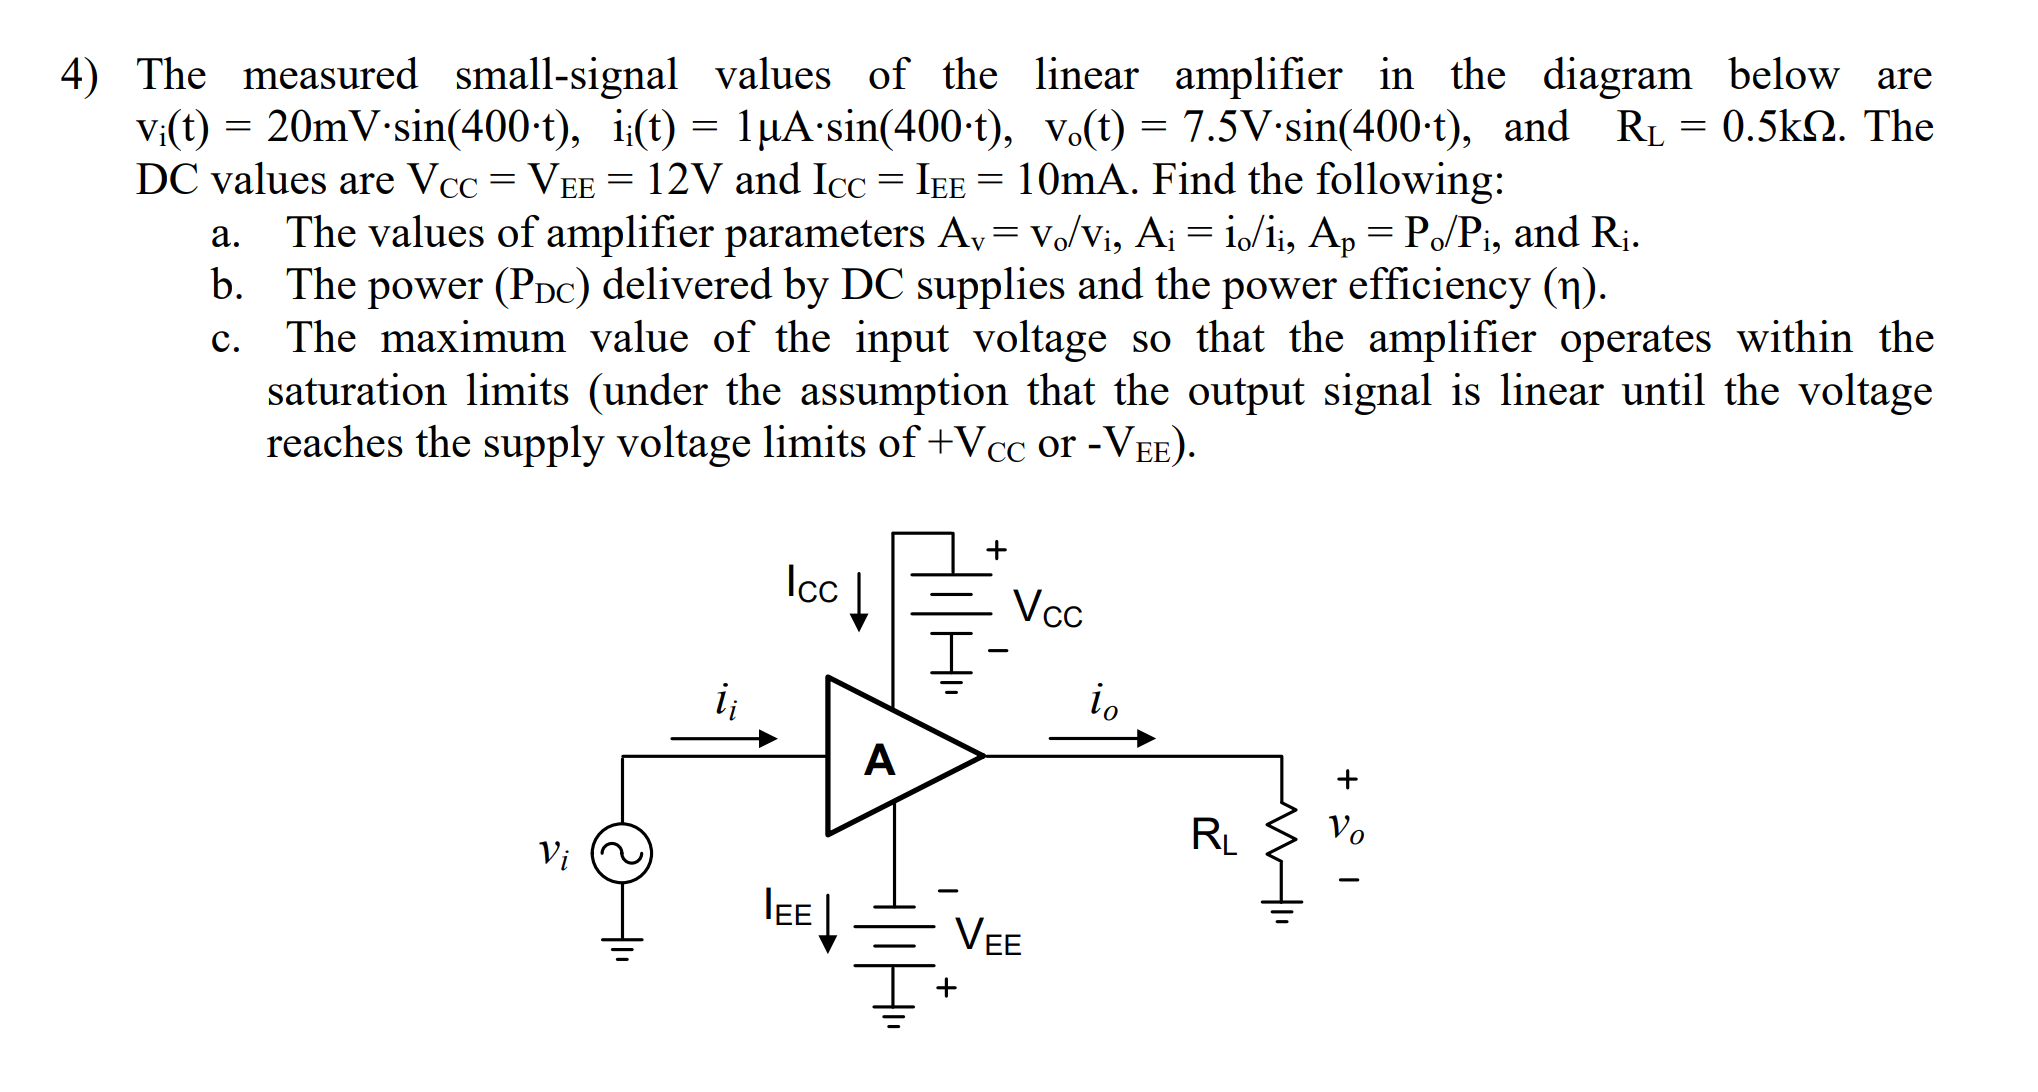 4) The measured small-signal values of the linear amplifier in the diagram below are
V:(t) = 20mV-sin(400-t), i;(t) = 1µA•sin(400-t), vo(t) = 7.5V-sin(400-t), and RL = 0.5k2. The
DC values are Vcc = VEE = 12V and Icc = IEE = 10mA. Find the following:
The values of amplifier parameters Av= v./Vi, Ai = i,/ii, Ap = Po/Pi, and Ri.
b. The power (PDc) delivered by DC supplies and the power efficiency (n).
The maximum value of the input voltage so that the amplifier operates within the
saturation limits (under the assumption that the output signal is linear until the voltage
reaches the supply voltage limits of +Vcc or -VEE).
a.
c.
Ic
Vcc
io
i;
Vo
RL
Vi
IE
VEE
ш
